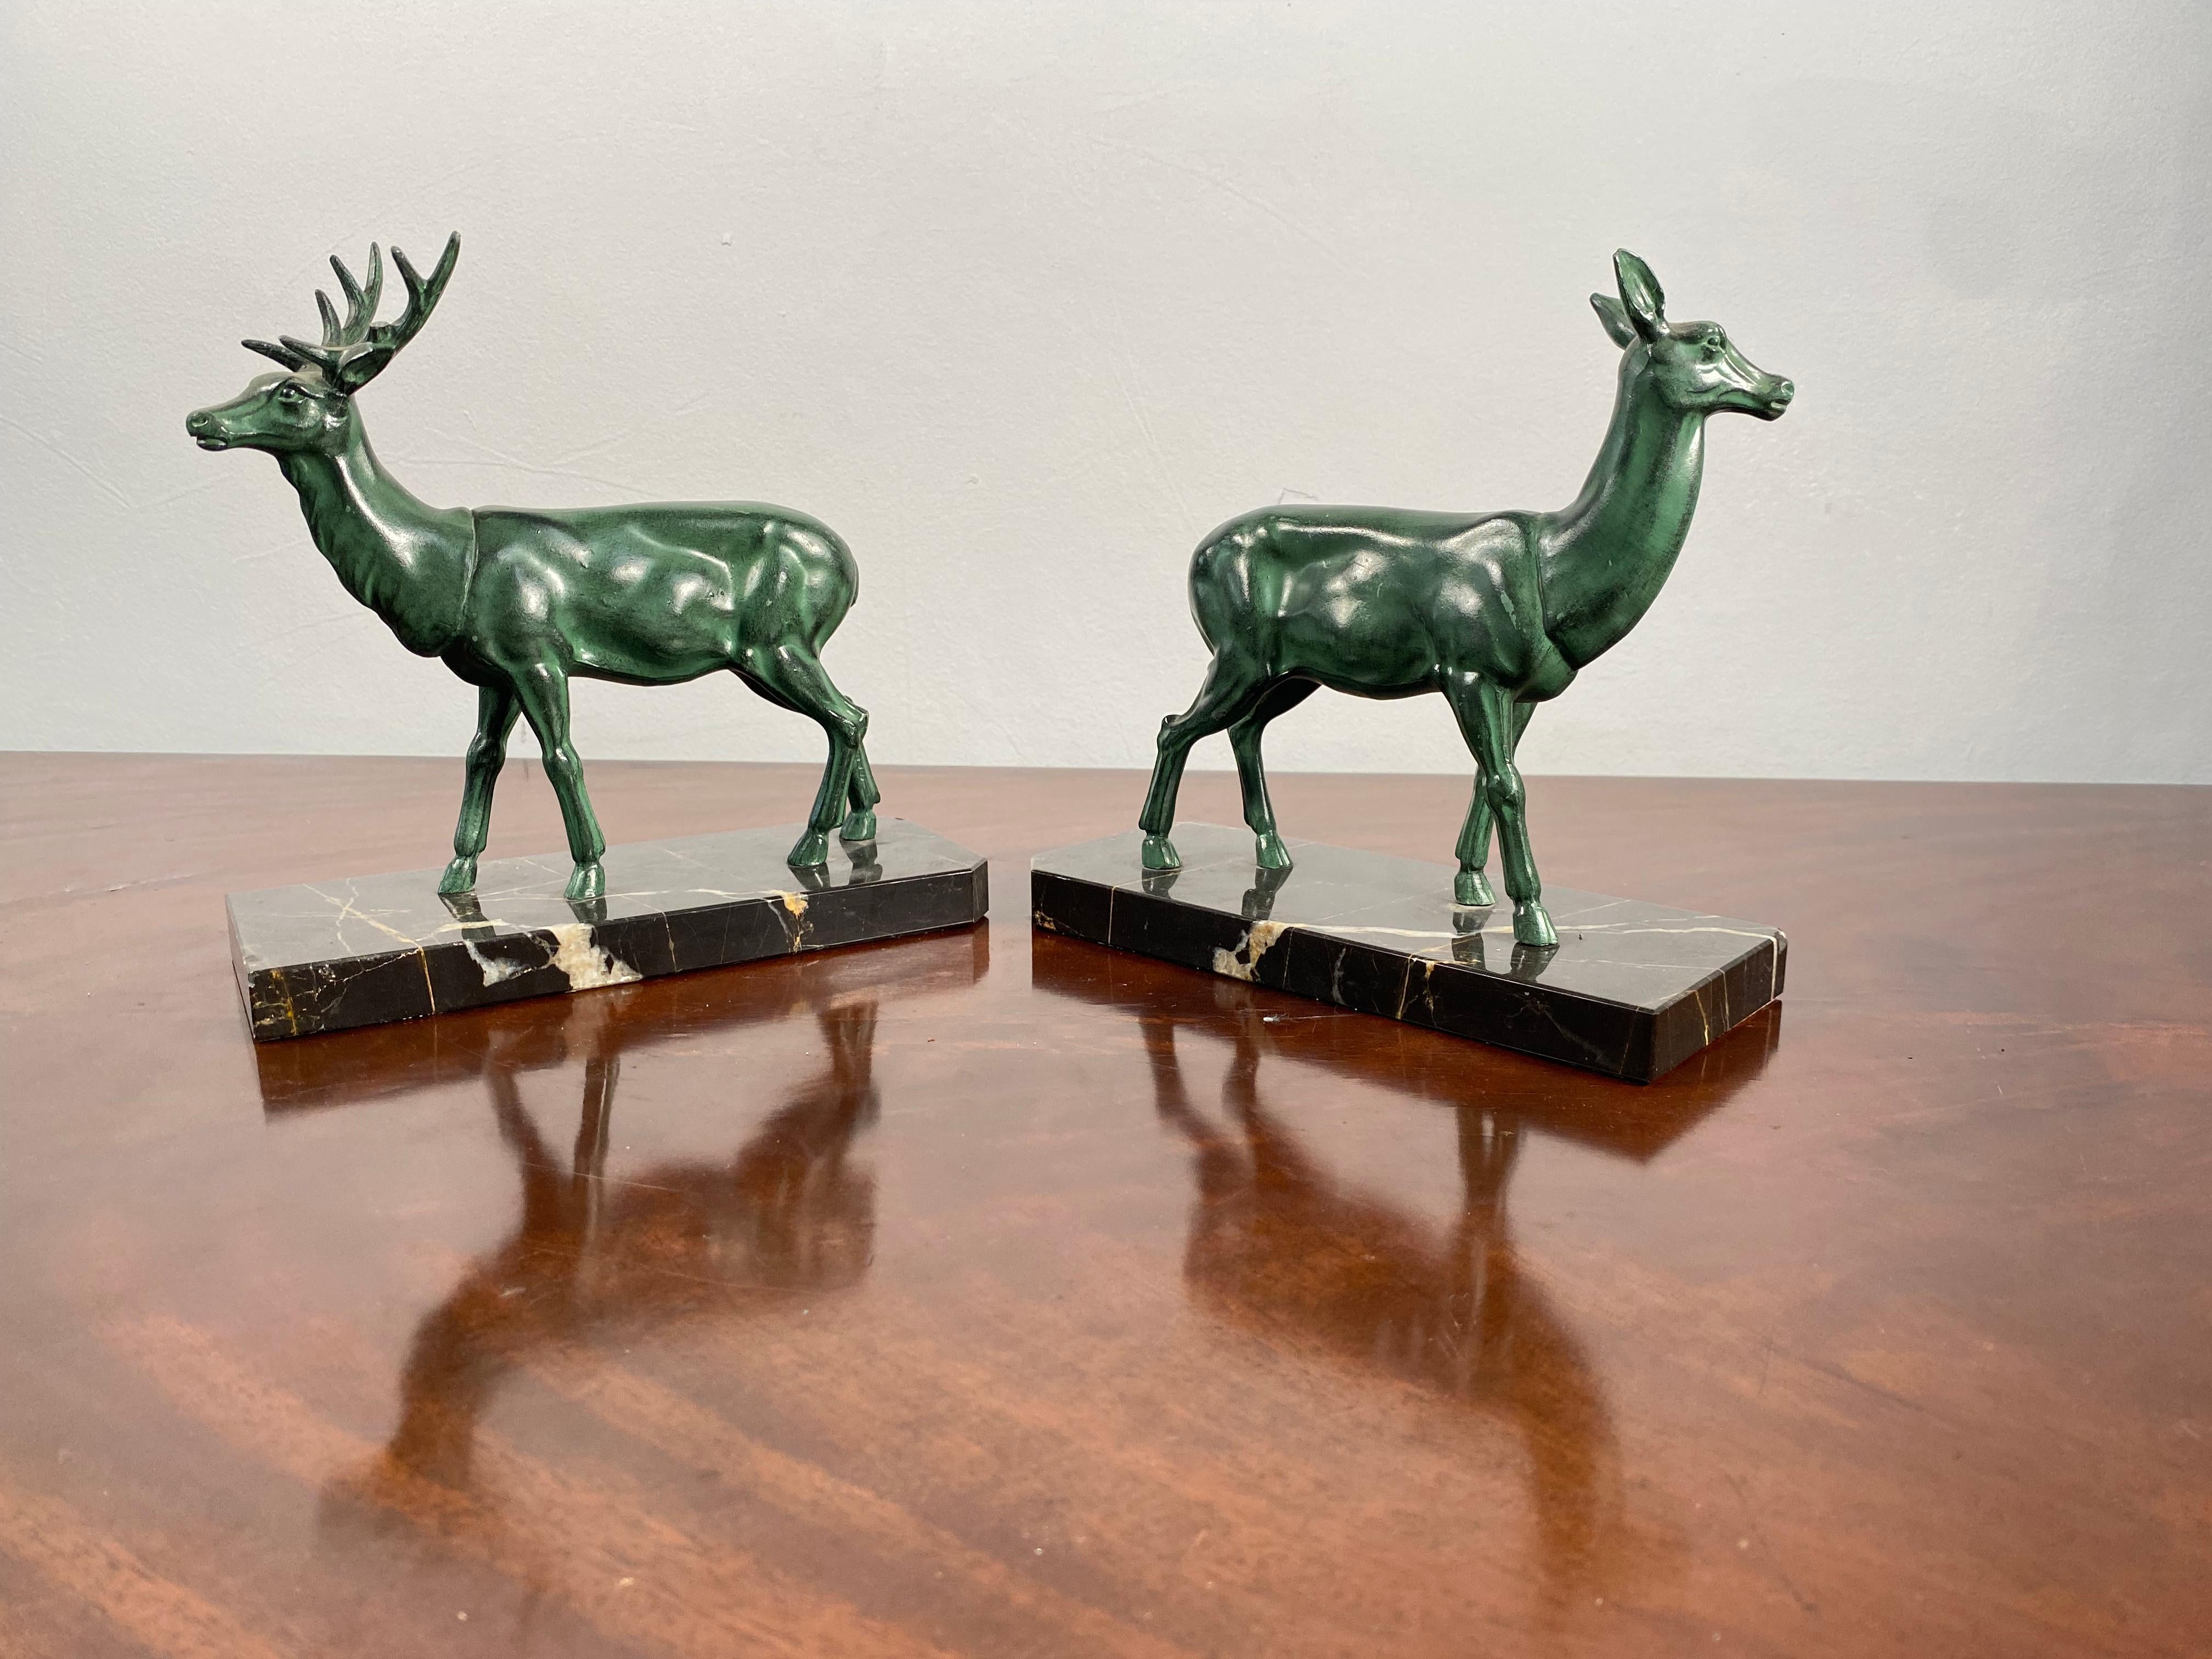 A lovely pair of french art deco bronze and marble bookends, depicting a male and female deer.